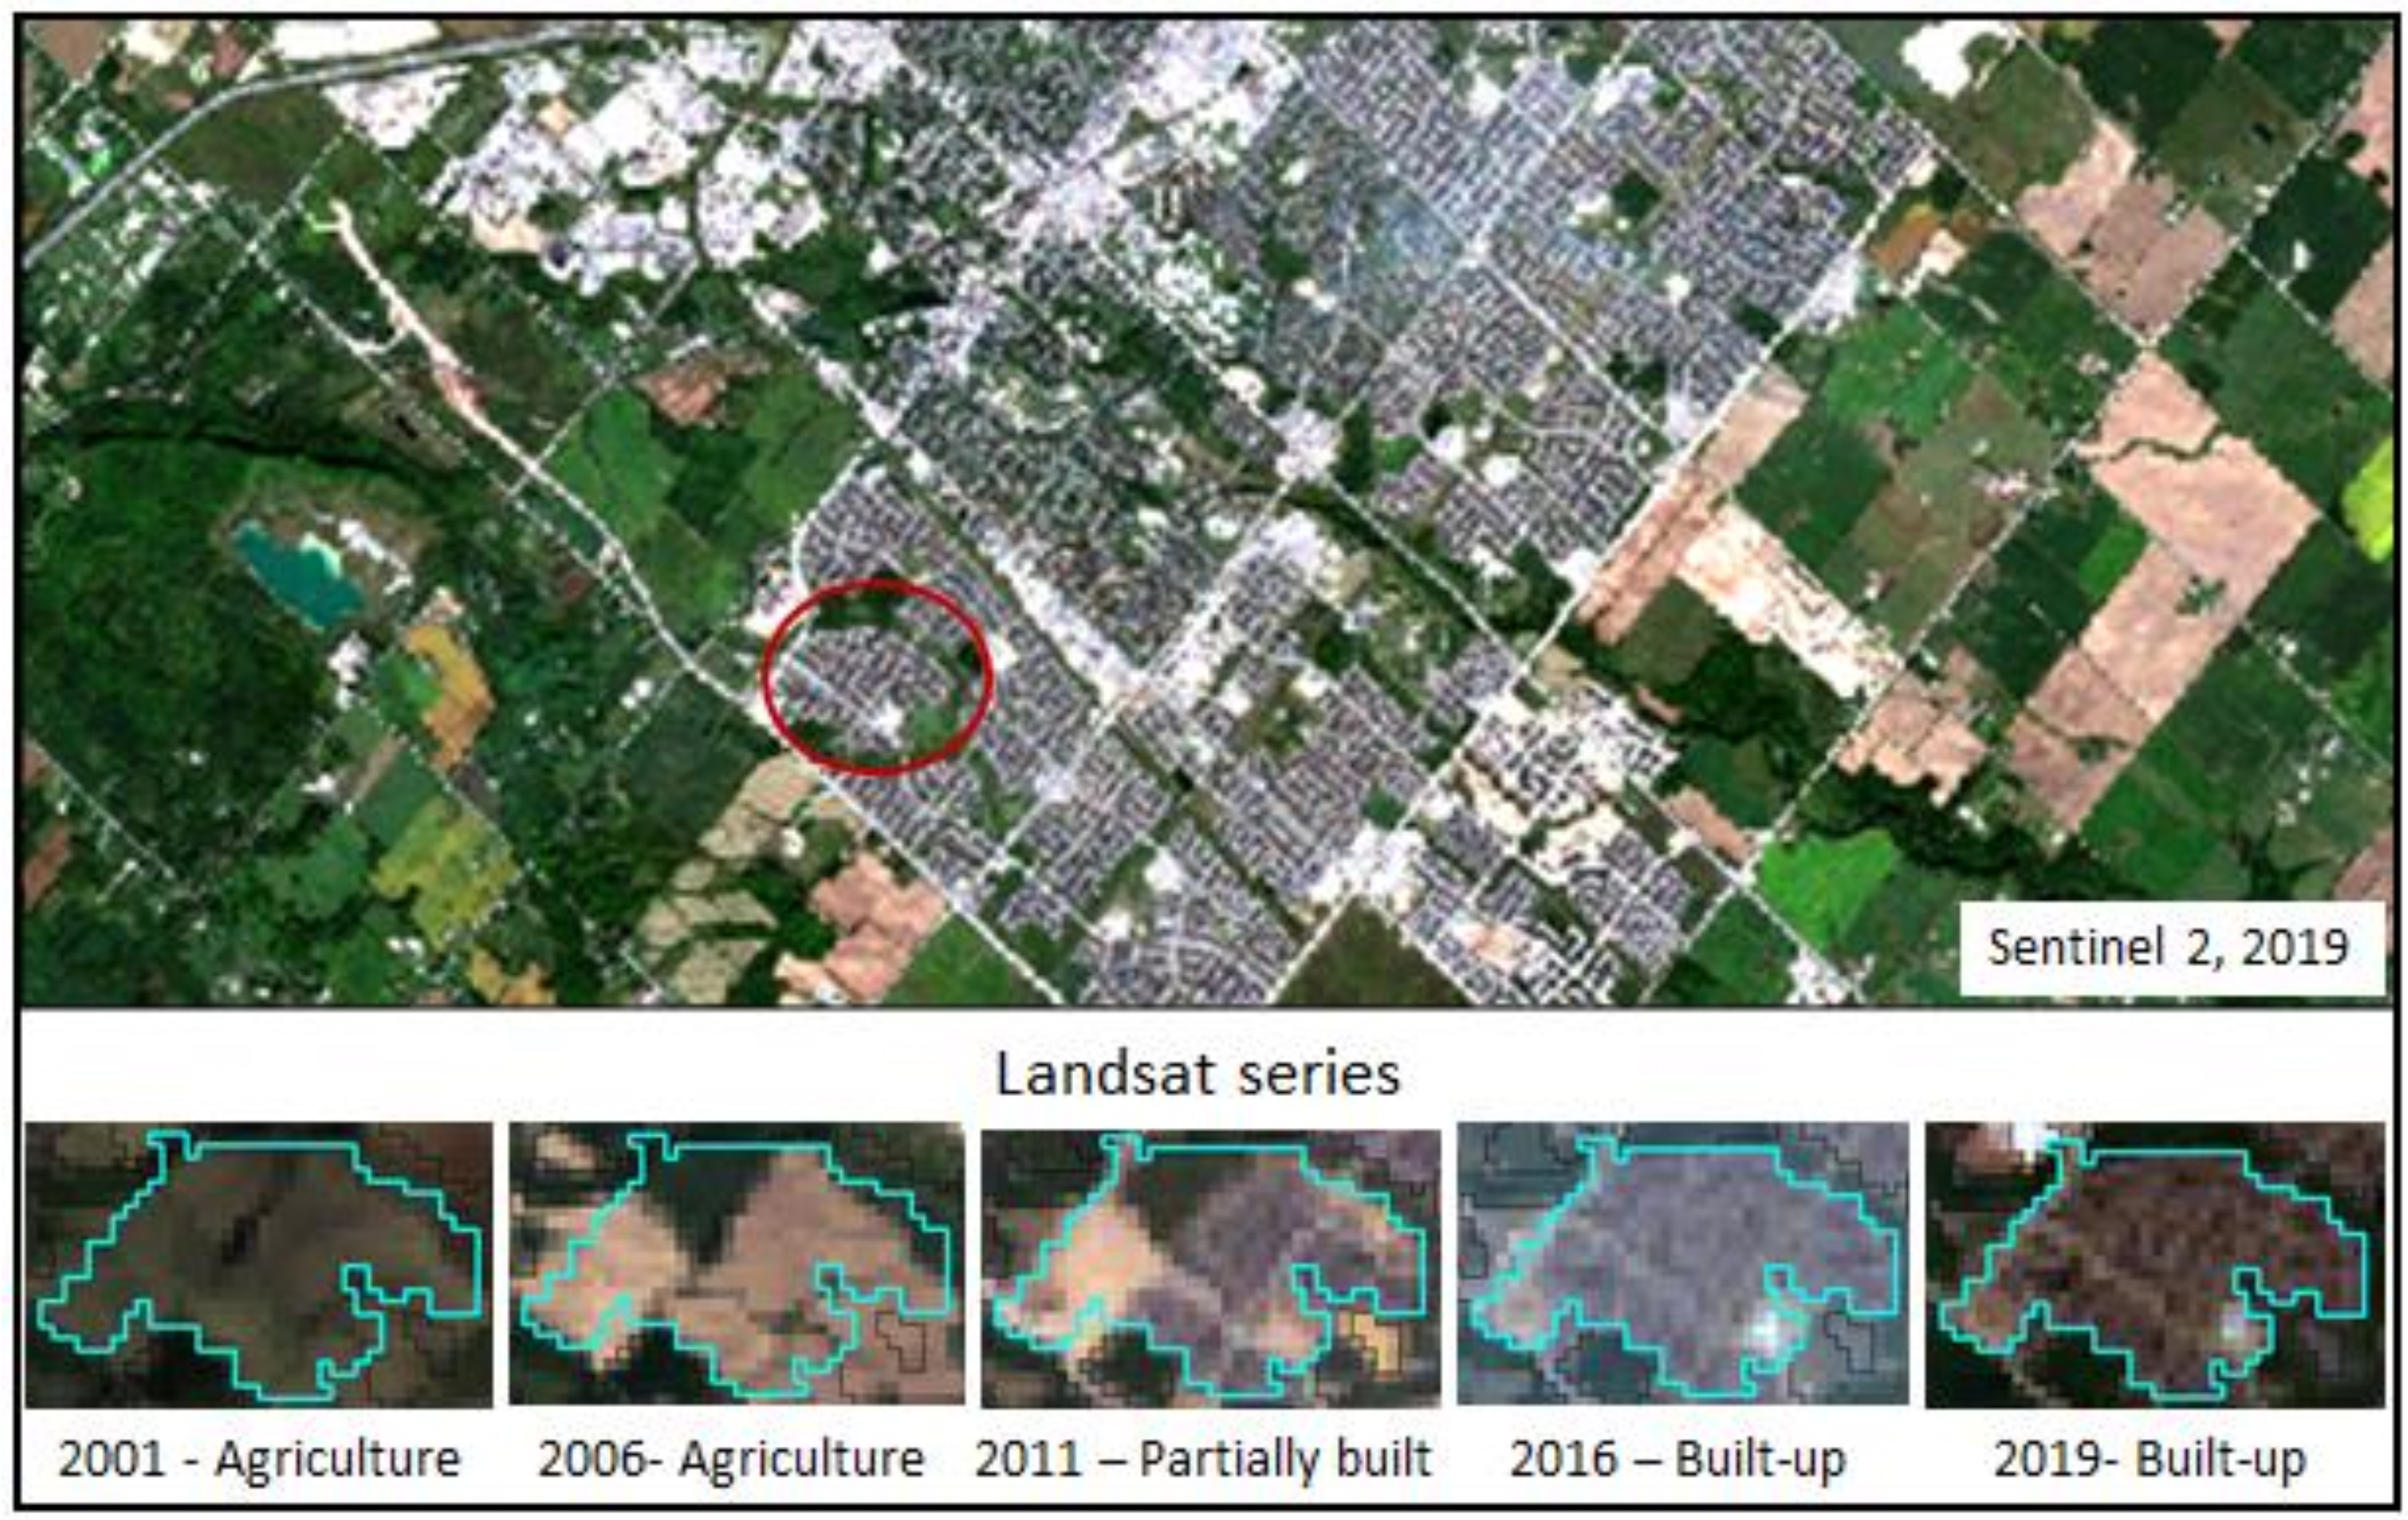 Changes observed in polygon 688 from Landsat series, 2001 to 2019.